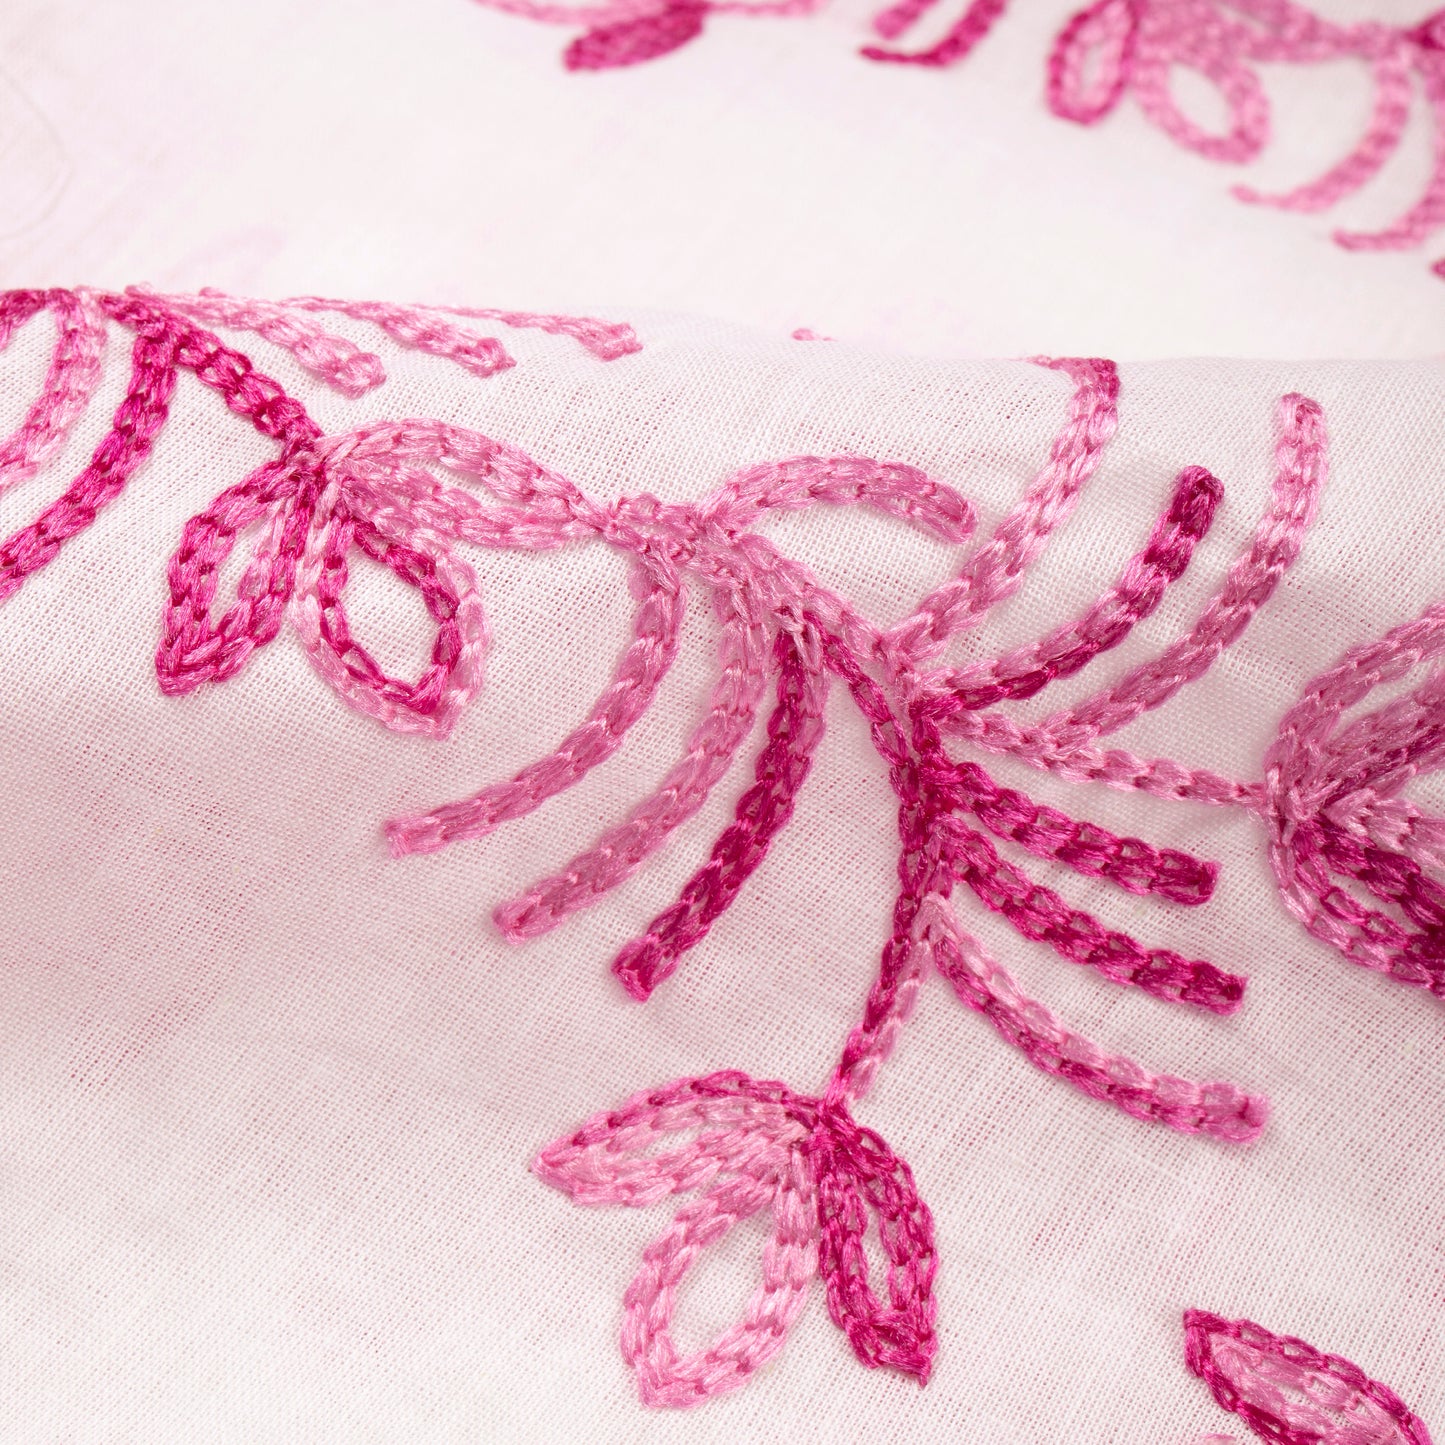 Beautiful Thread Leaf Embroidery Work On Cotton Fabric